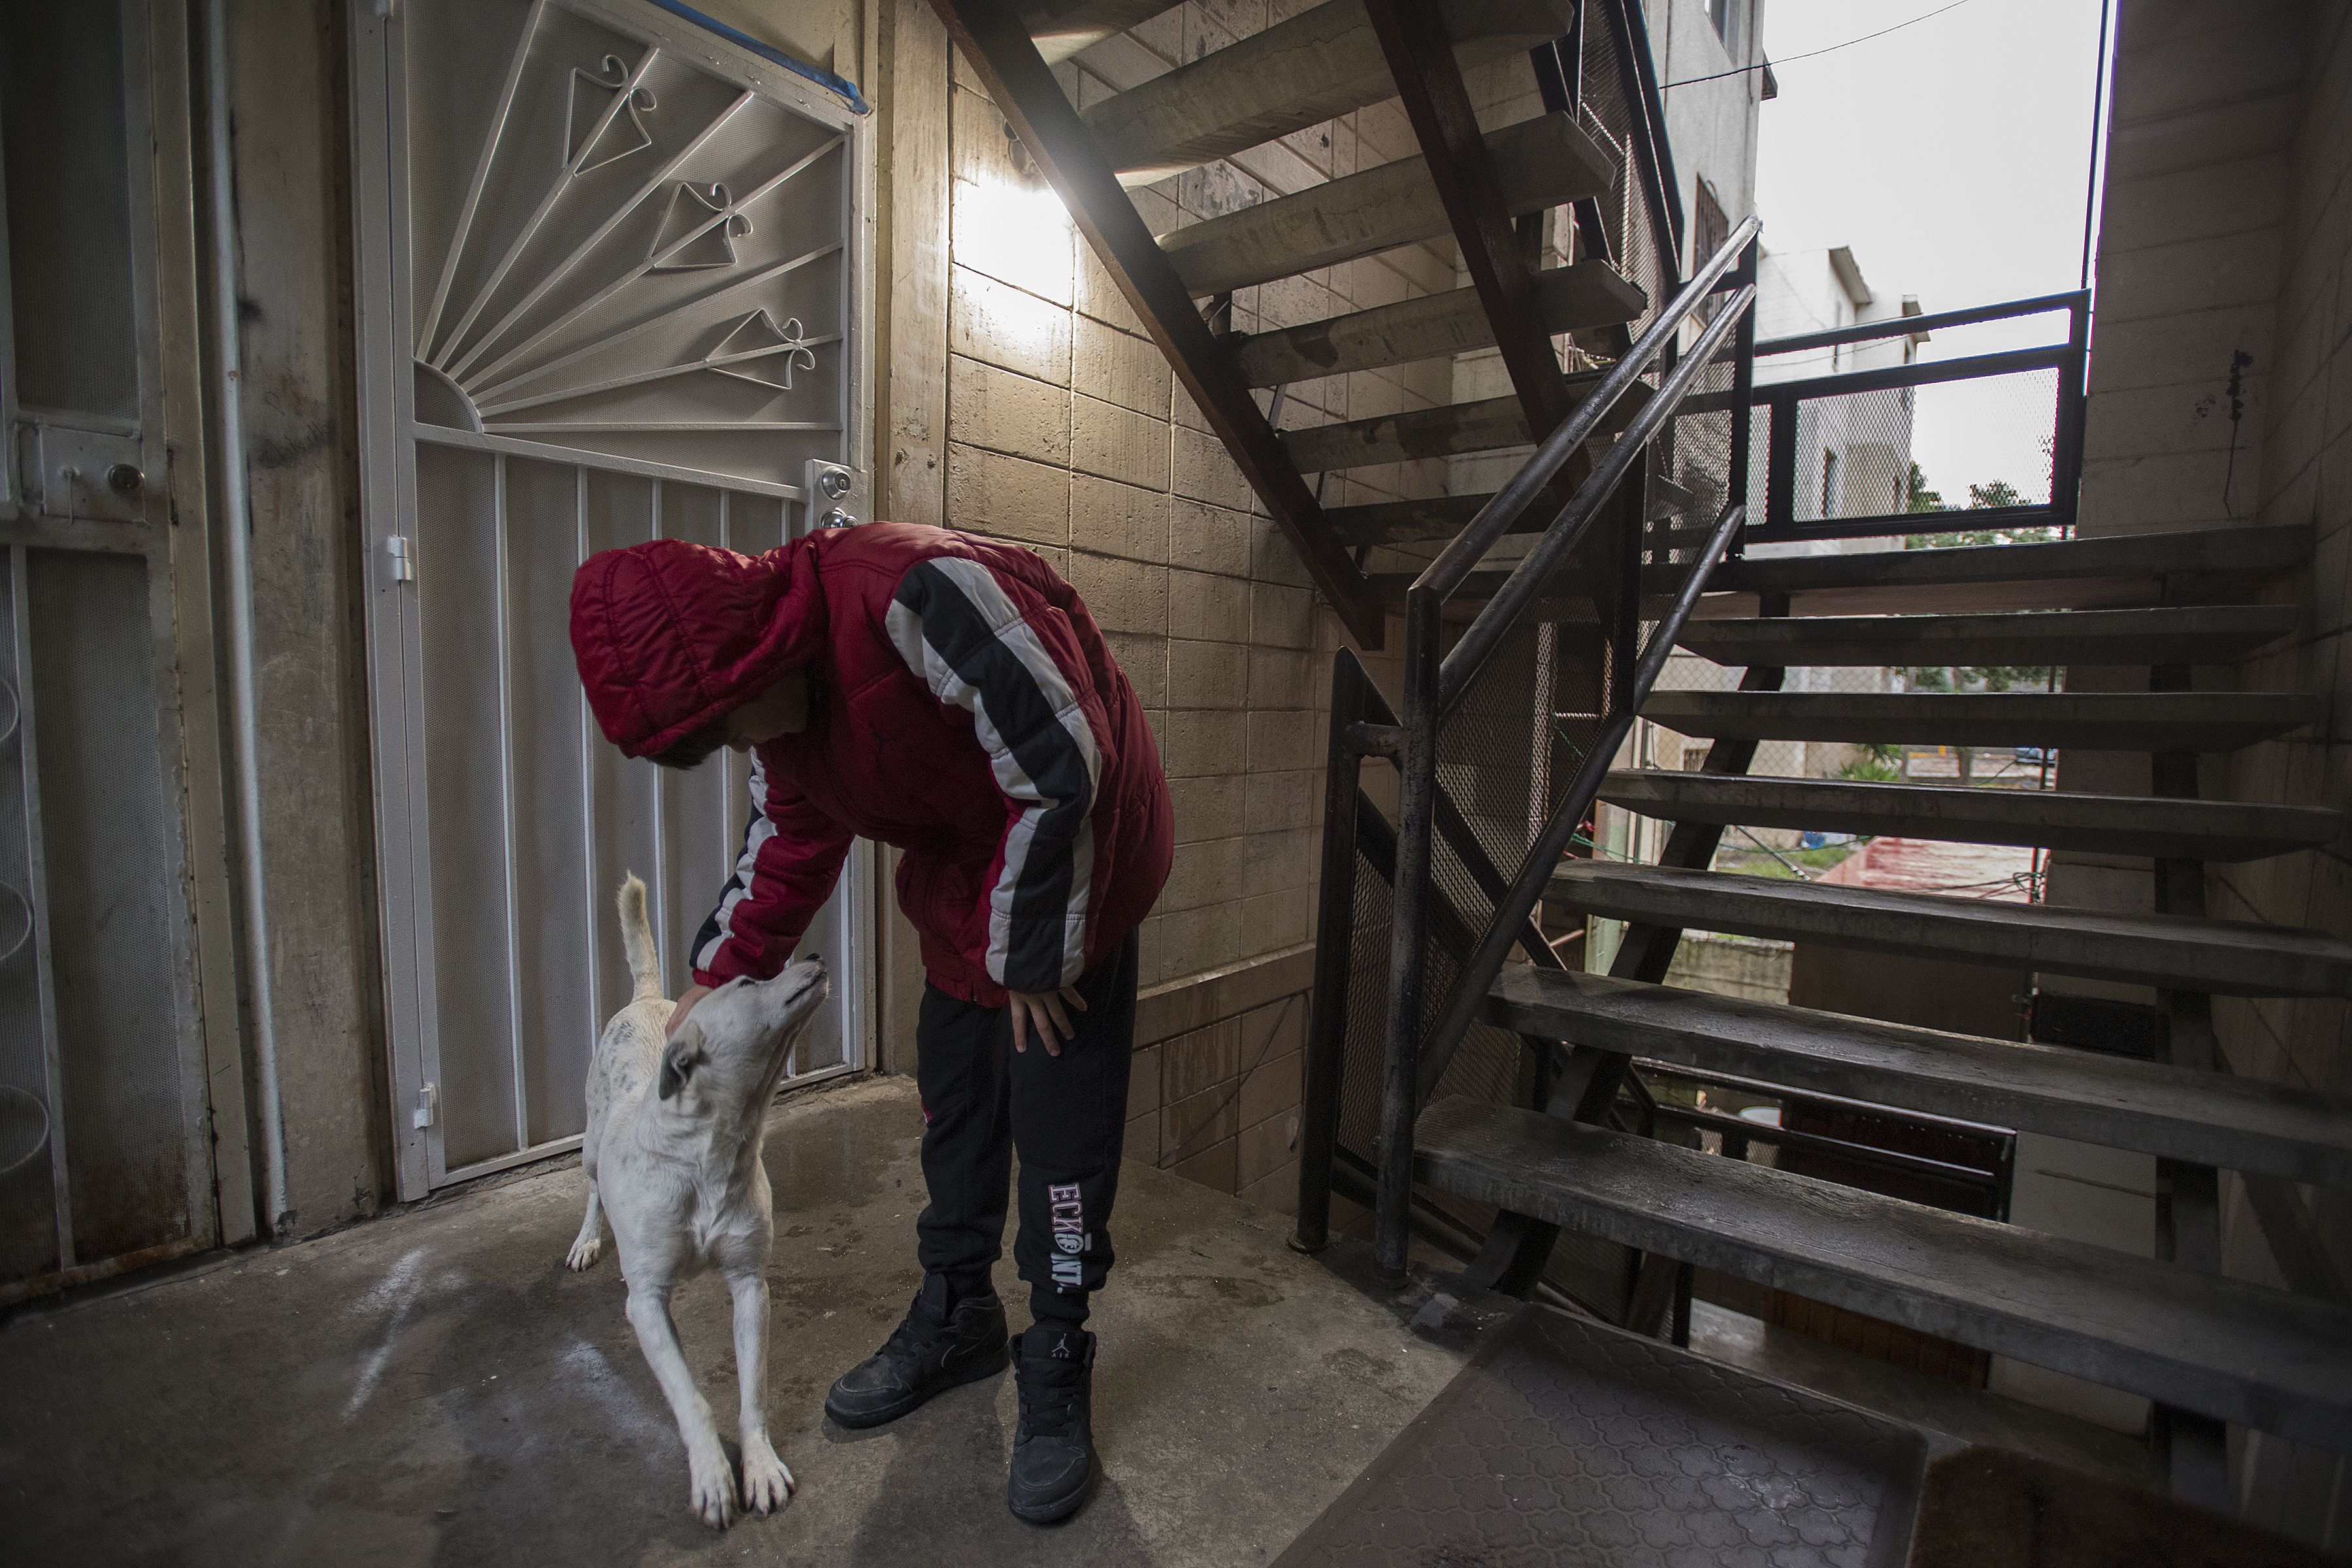 Chester, a stray dog living in Ramon Flores' apartment building, stretches out while bonding with Edward Flores on Nov. 28. Edward and the family often give food to Chester but he is not allowed in the apartment. Image by Amanda Cowan. Mexico, 2019.